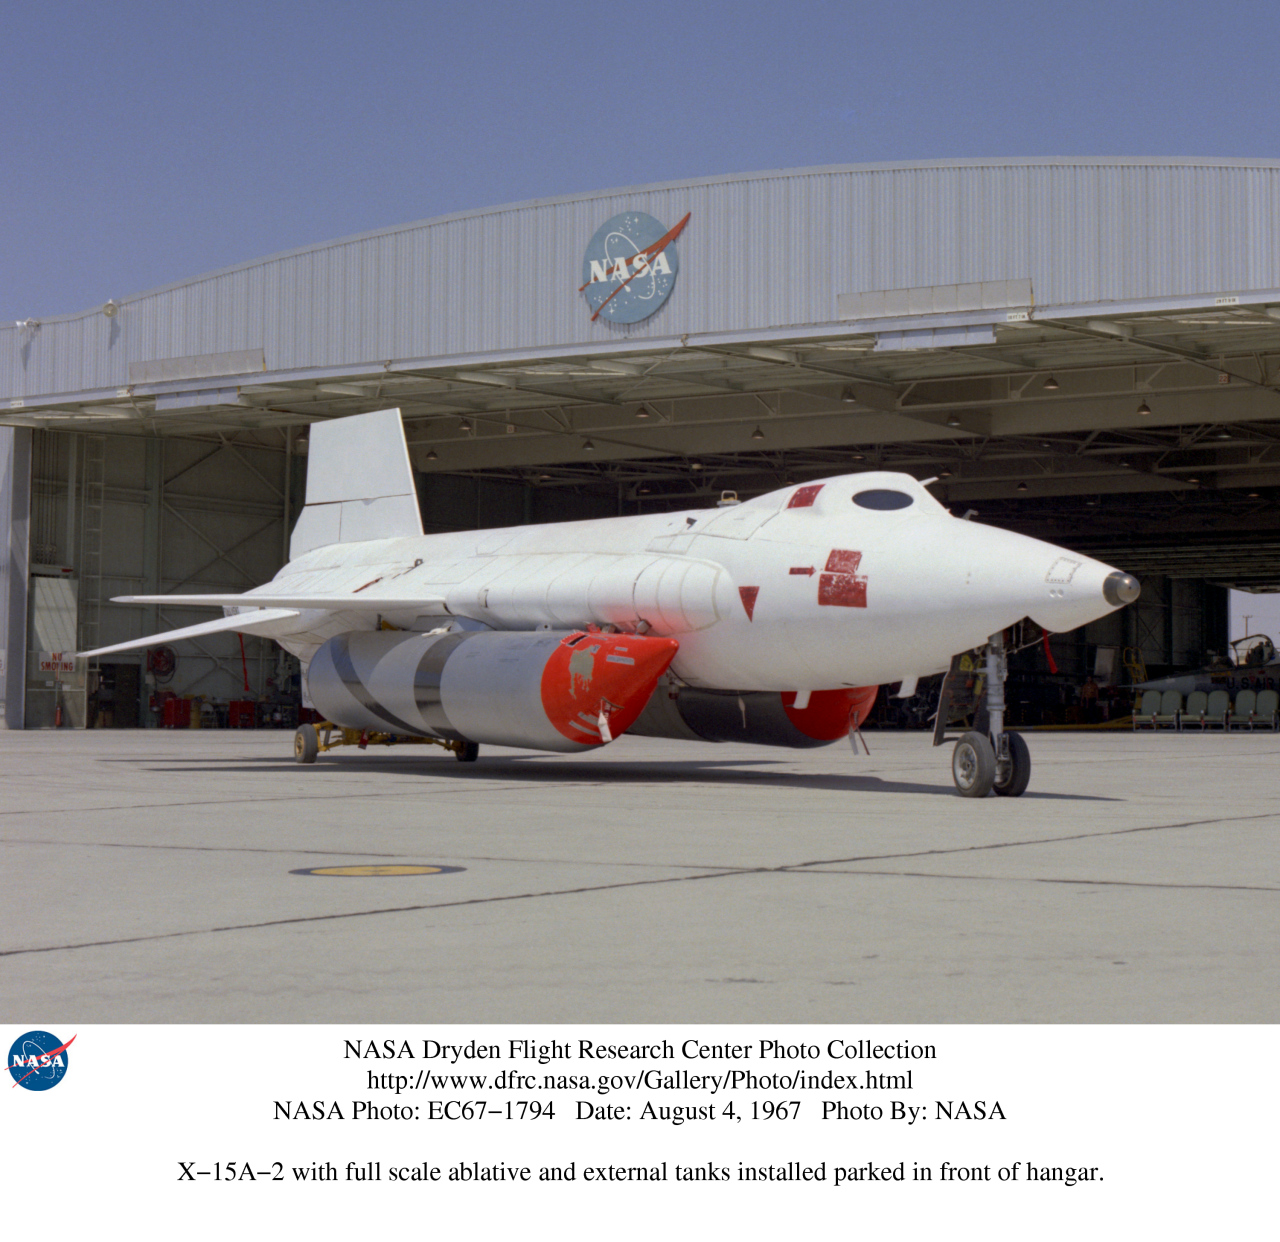 North-American-Aviation-X-15A-2-with-ablative-coating-and-external-tanks.jpg  by Pinback